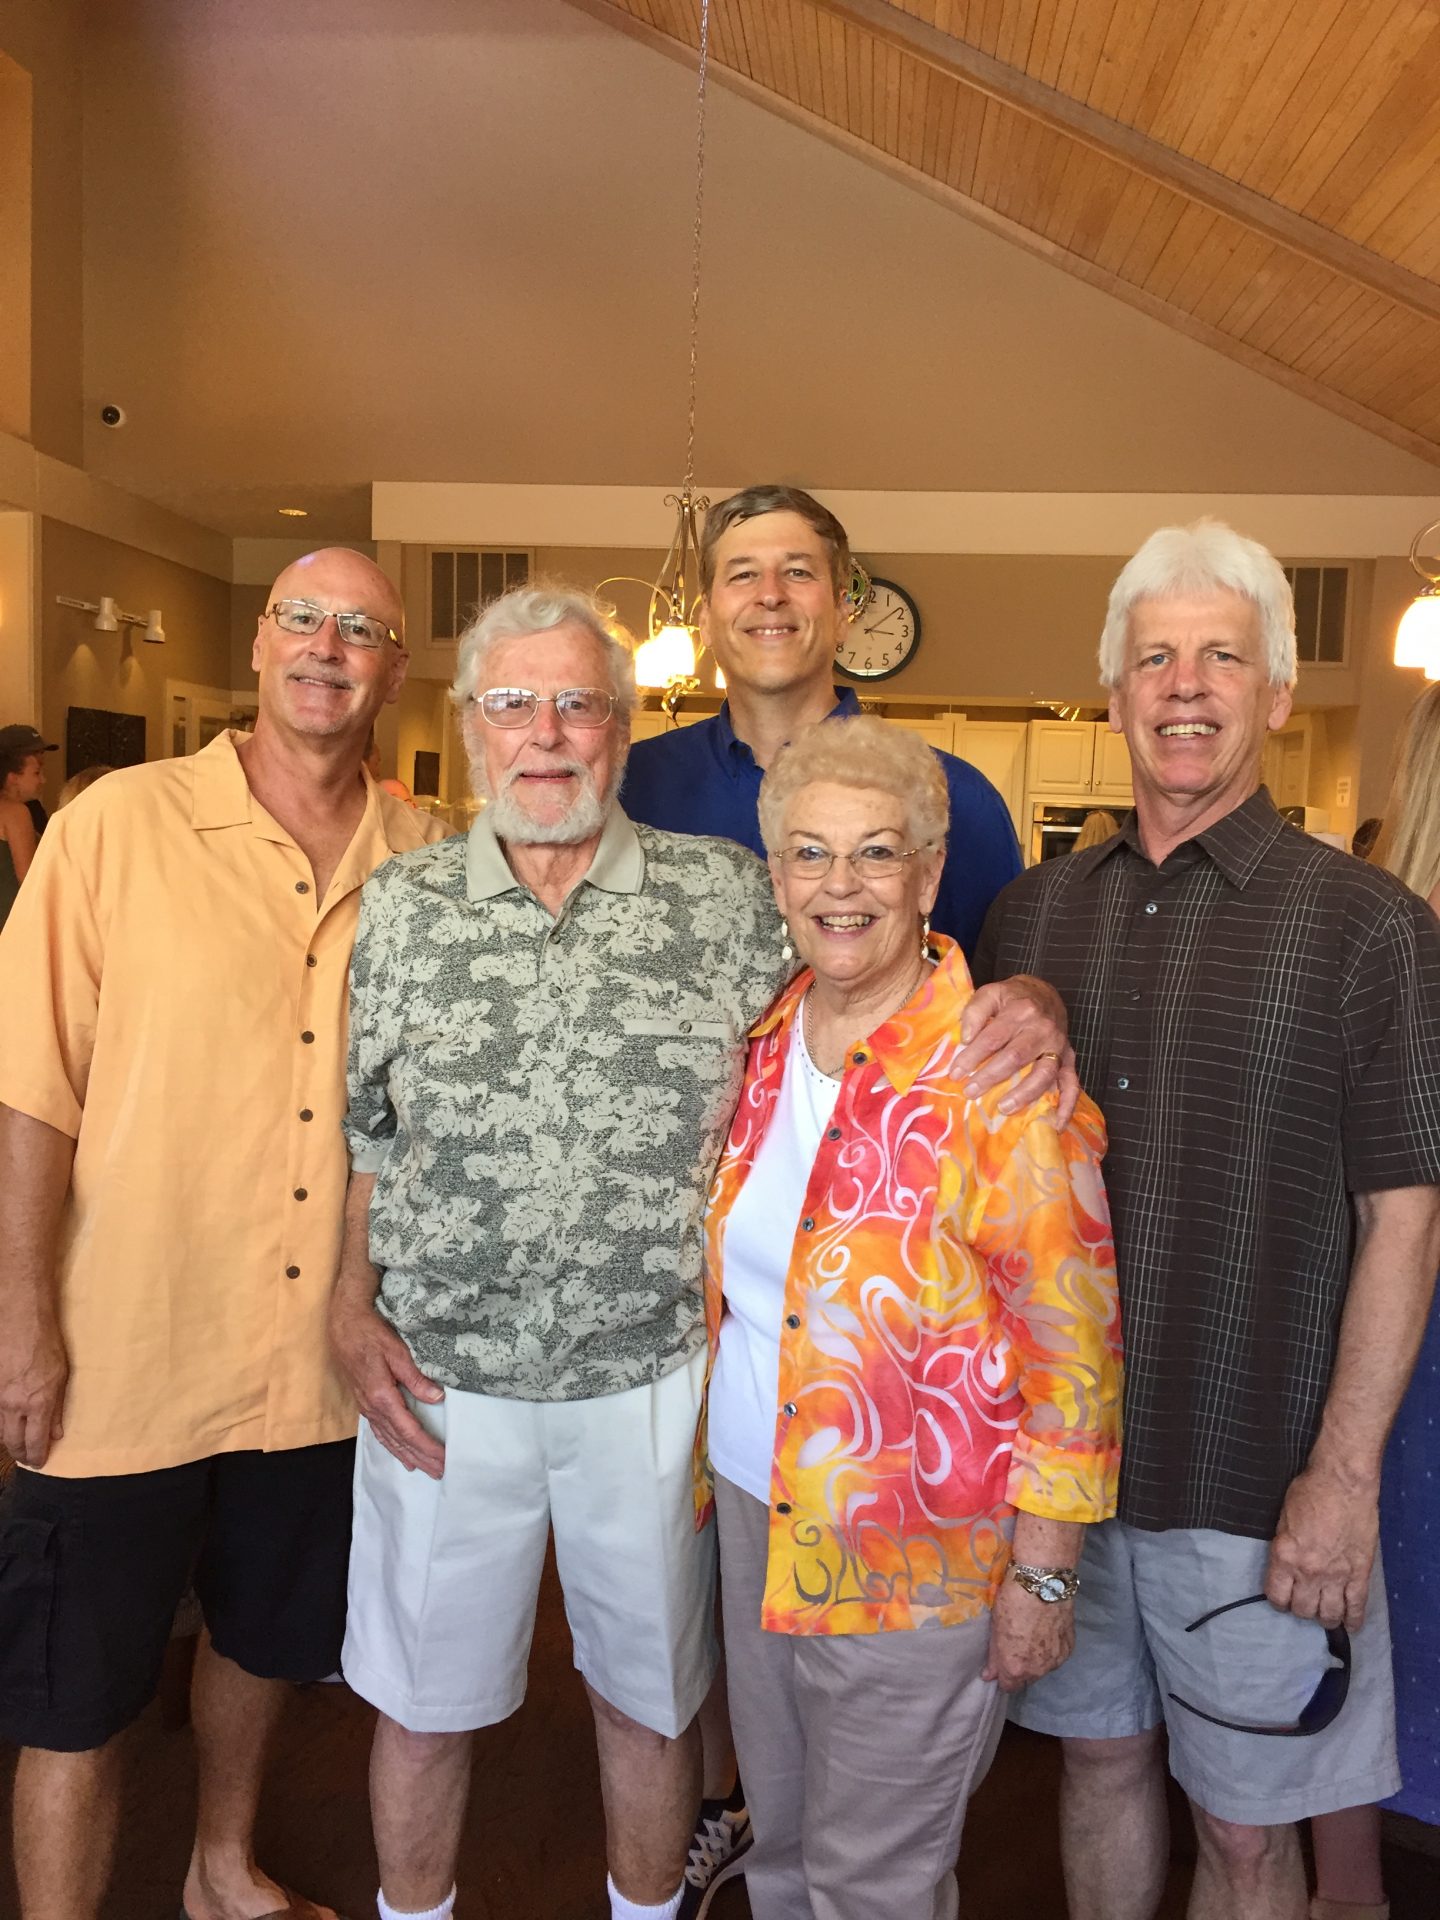 Jerry, Pat, Tom, Gary and Jim 2018 at Jessica's high school graduation party.<br />
This captures so much joy!